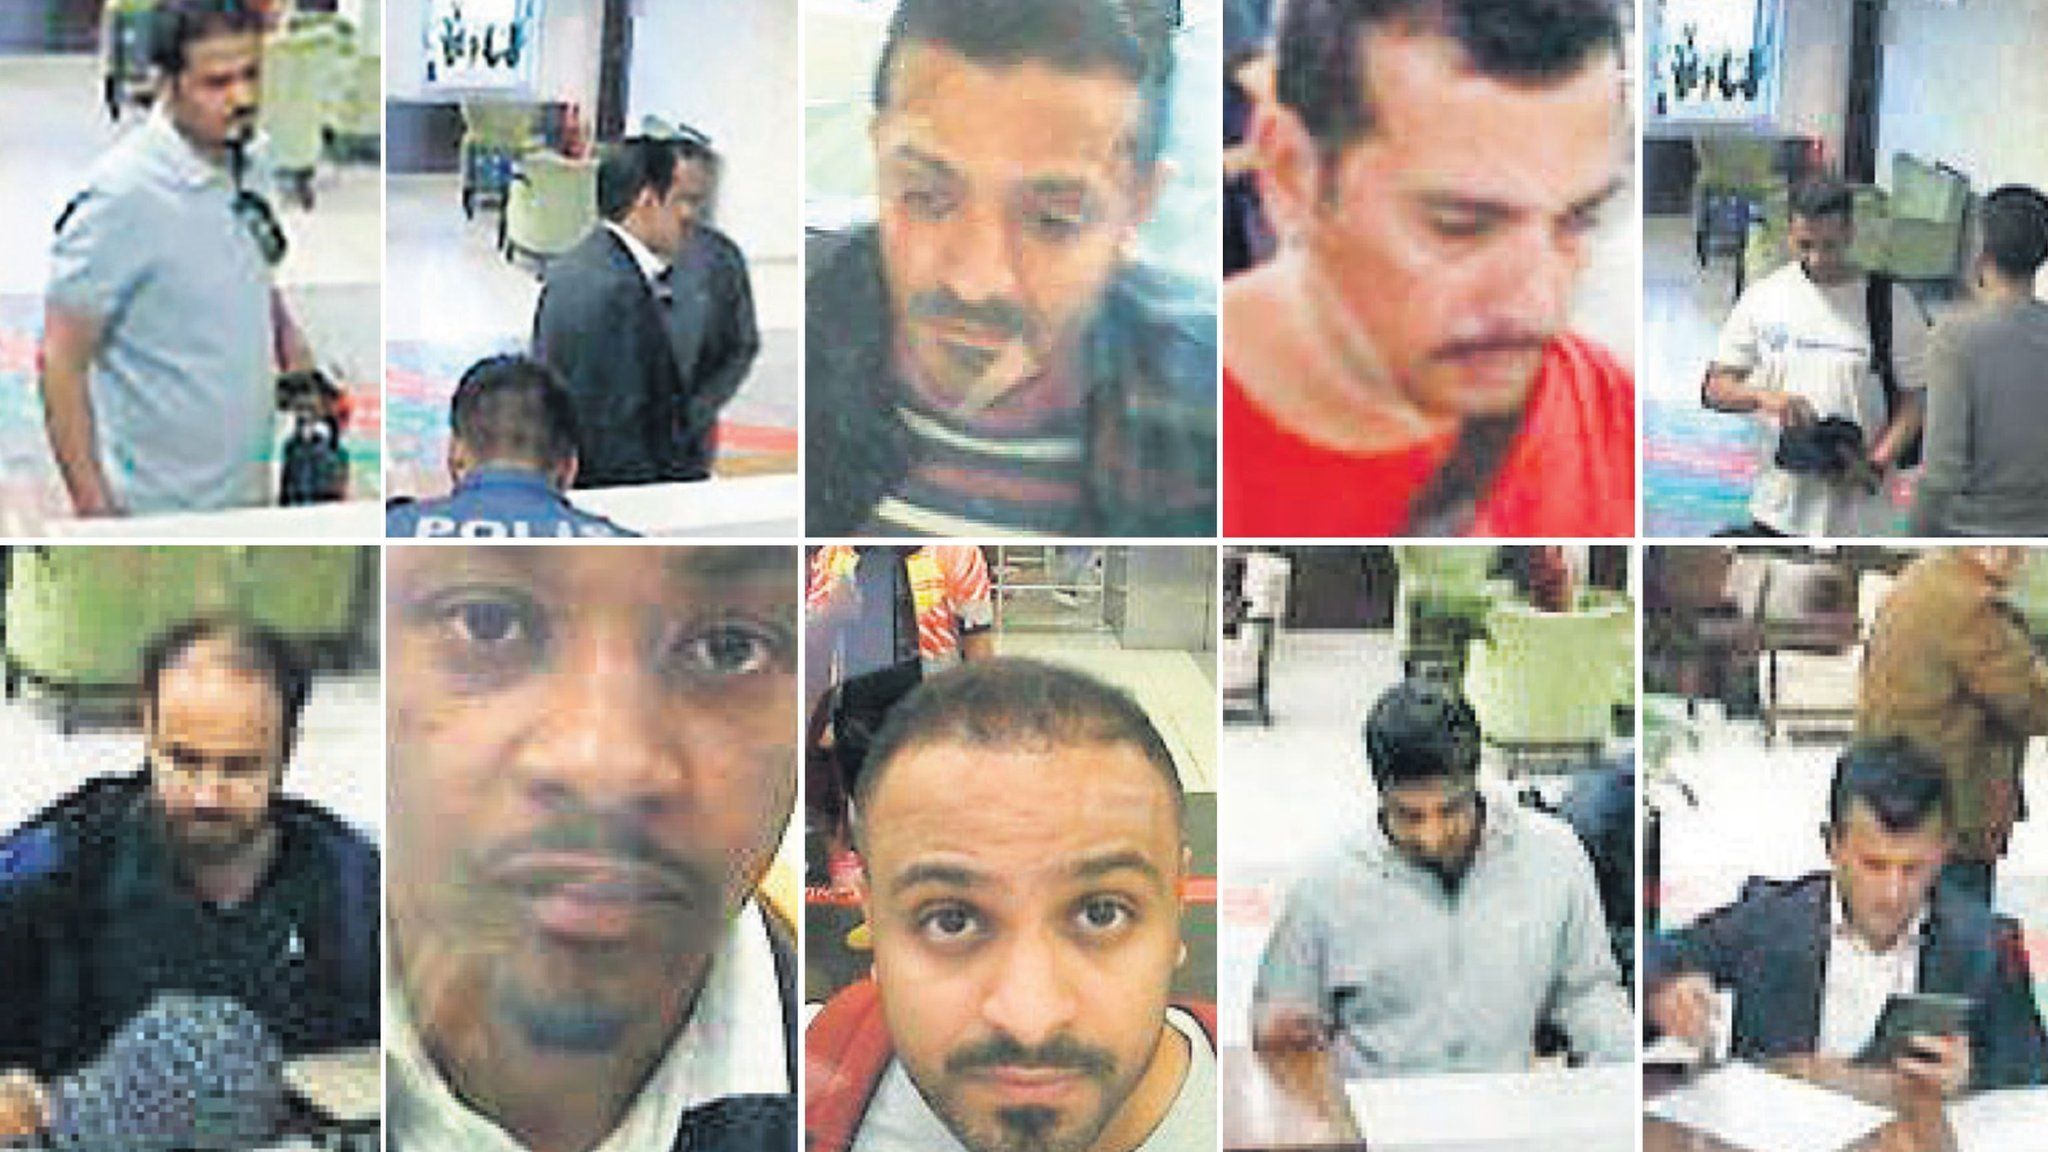 CCTV pictures made available through the Turkish newspaper Sabah allegedly showing Saudi citizens who Turkish police suspect of involvement in the disappearance of Jamal Khashoggi (2 October 2018)